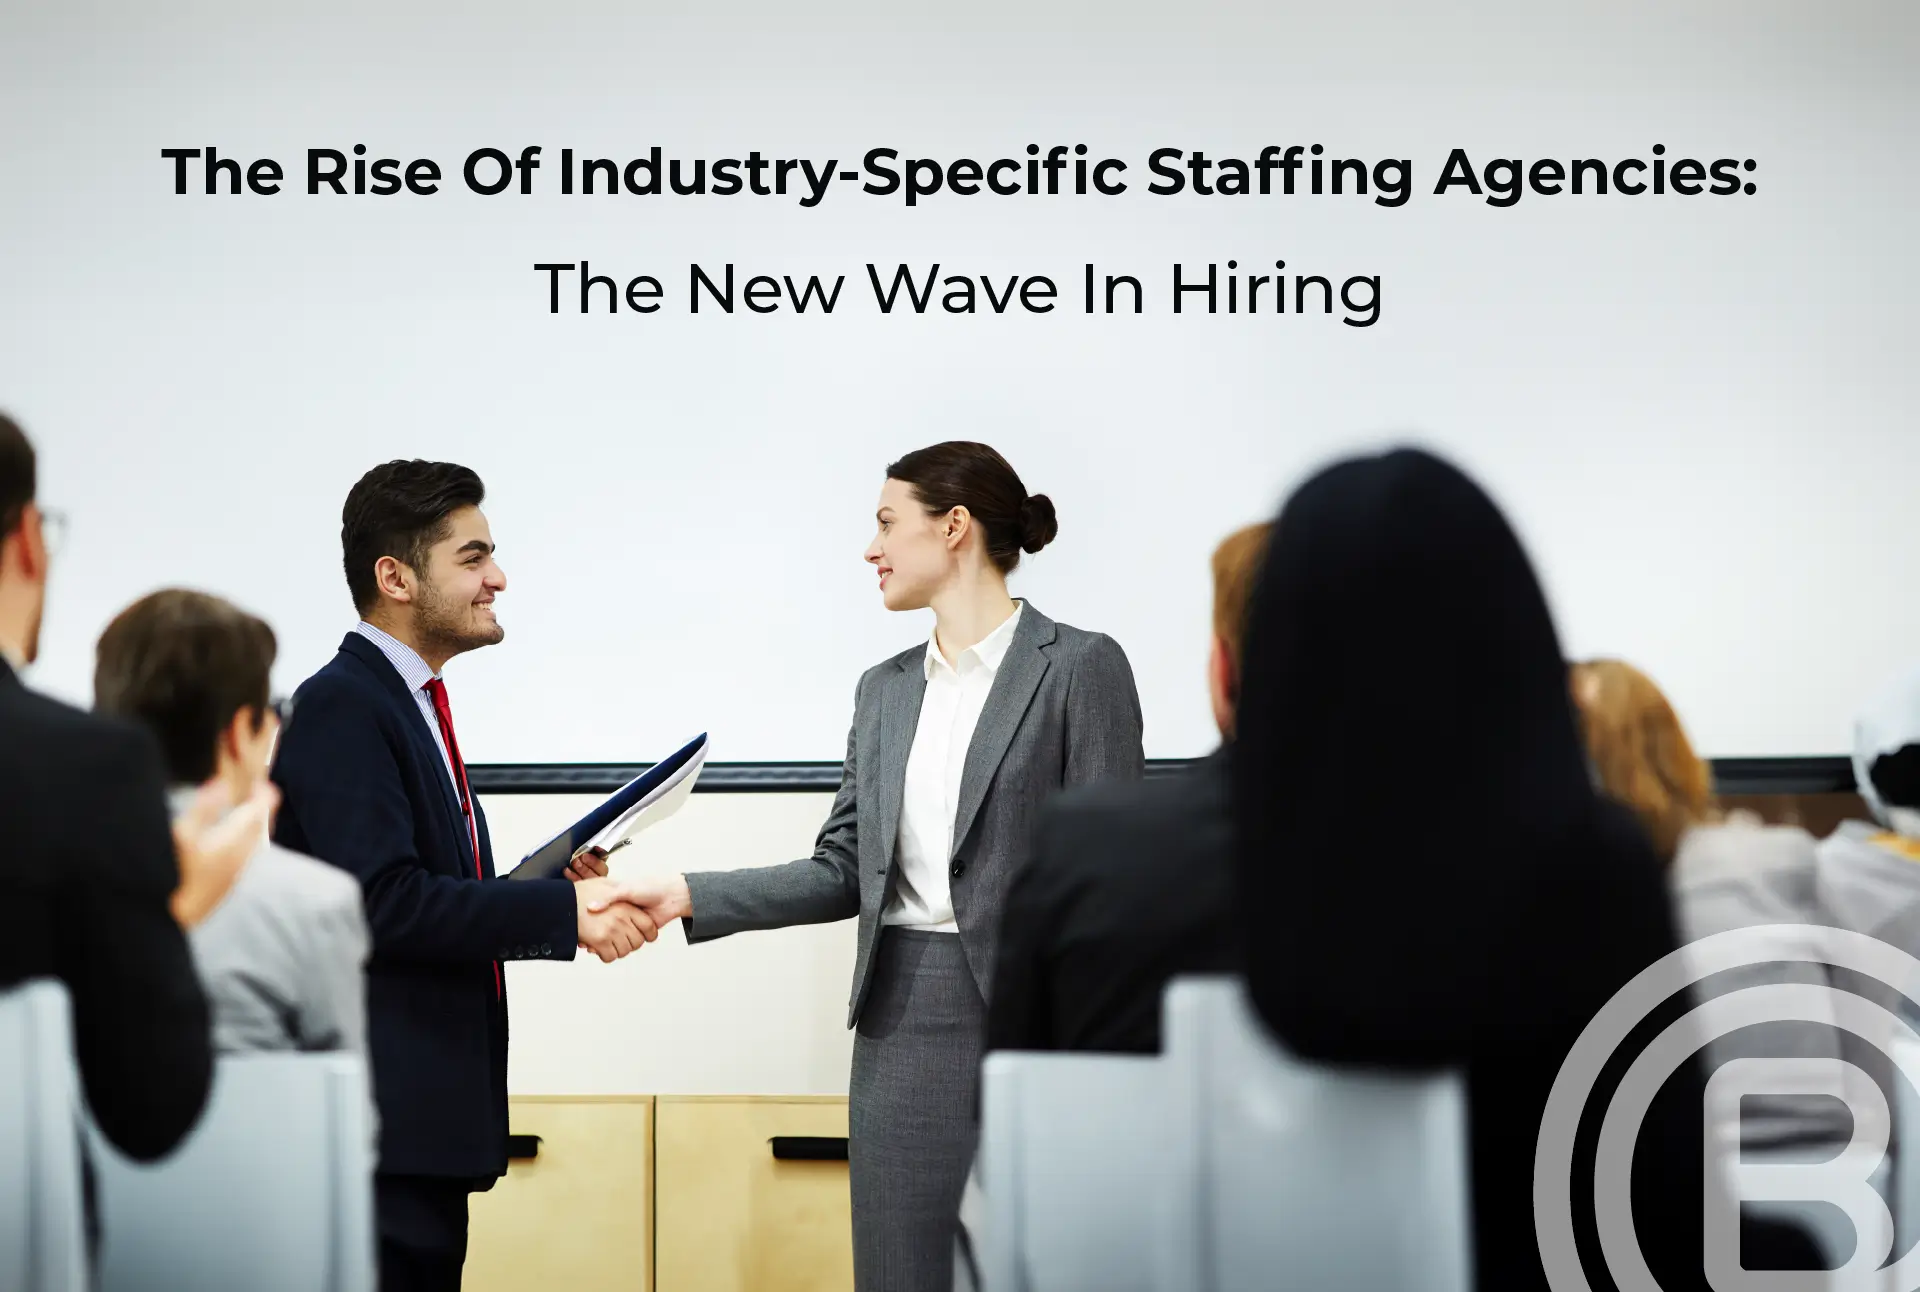 The Rise Of Industry-Specific Staffing Agencies: The New Wave in Hiring